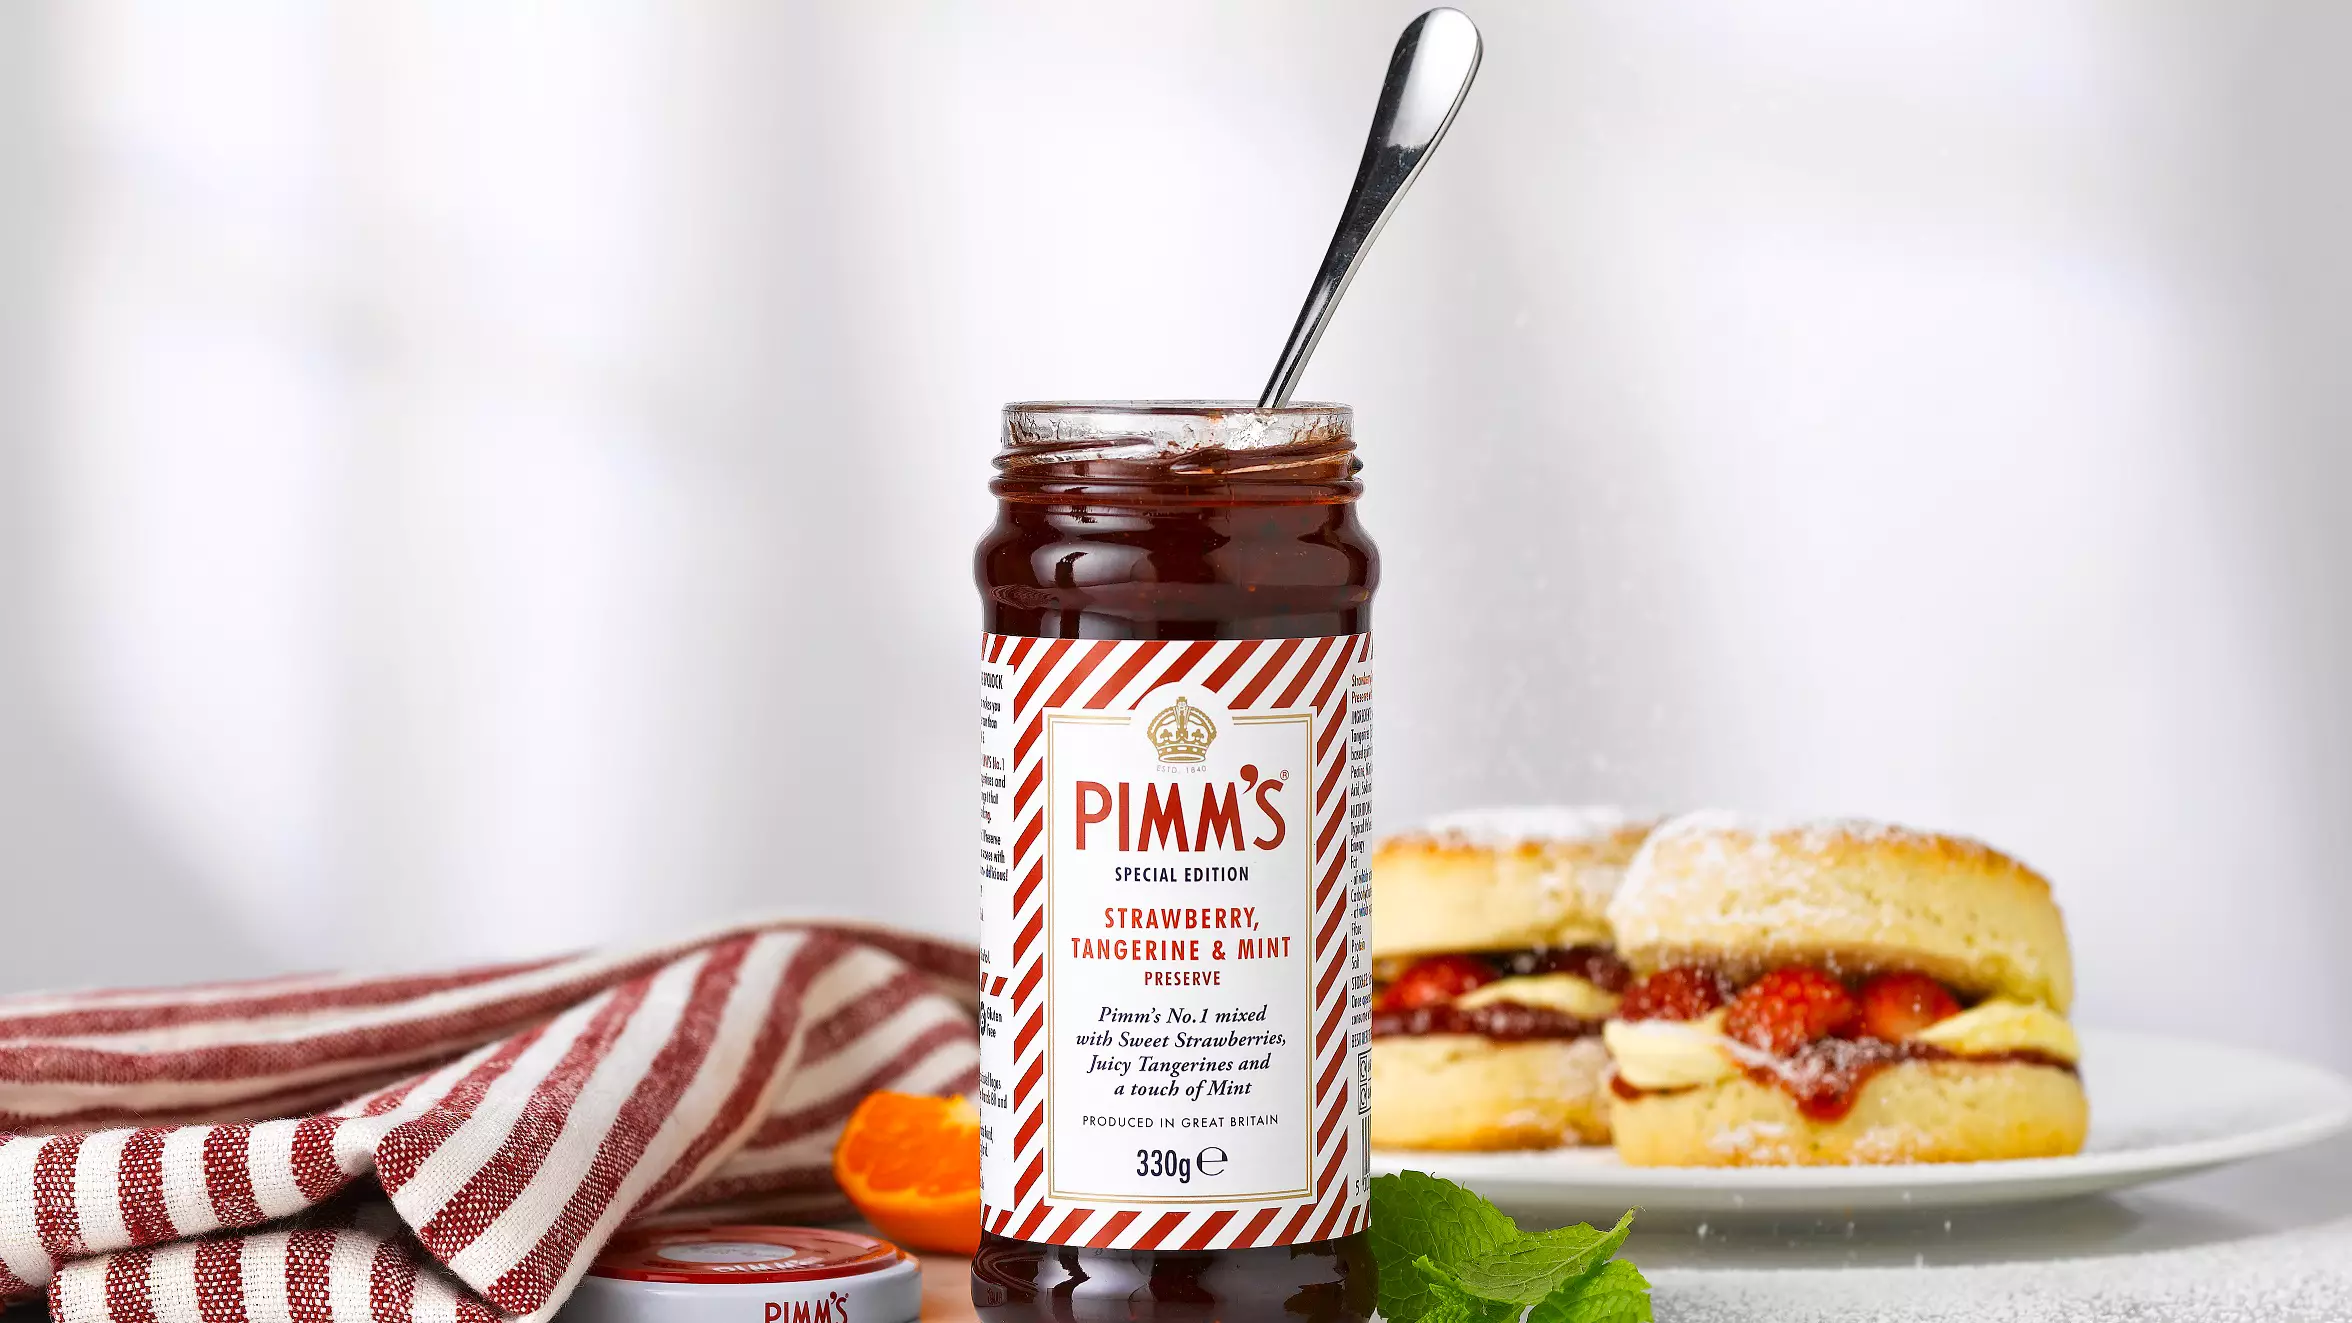 Pimm’s Now Comes In Delicious Jam Form - Here's Where You Can Buy It